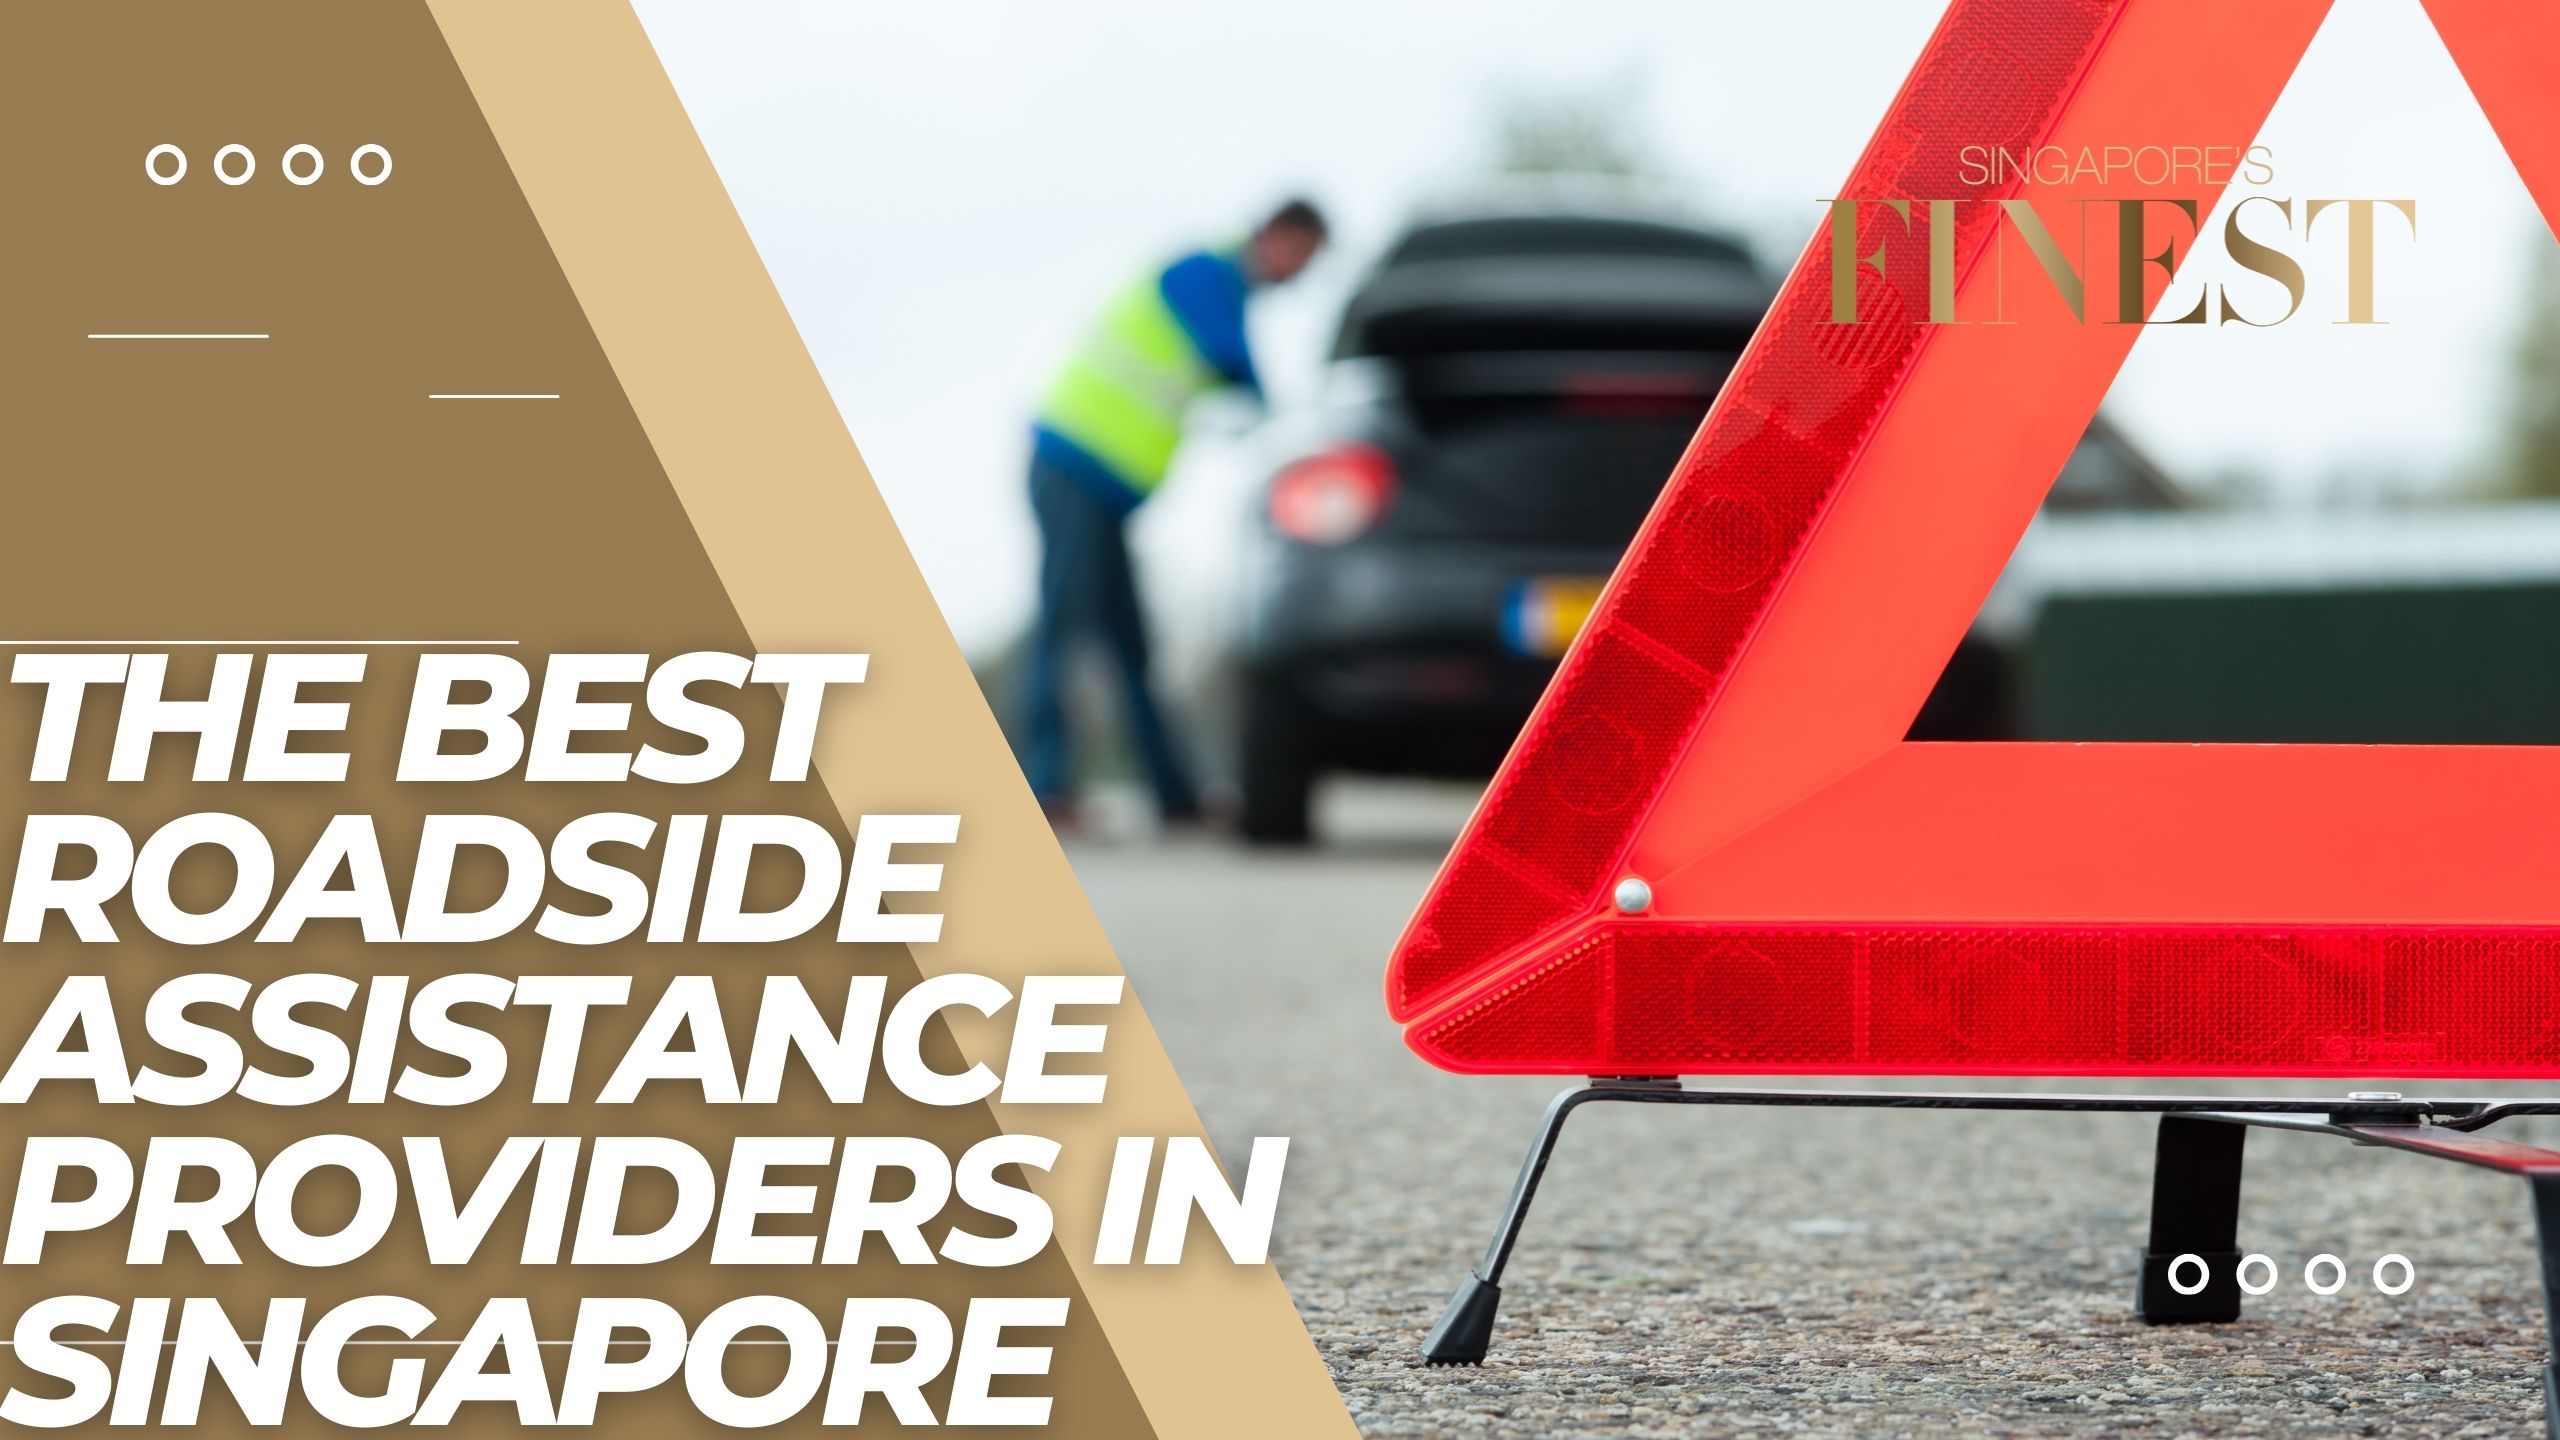 The Finest Roadside Assistance Providers in Singapore